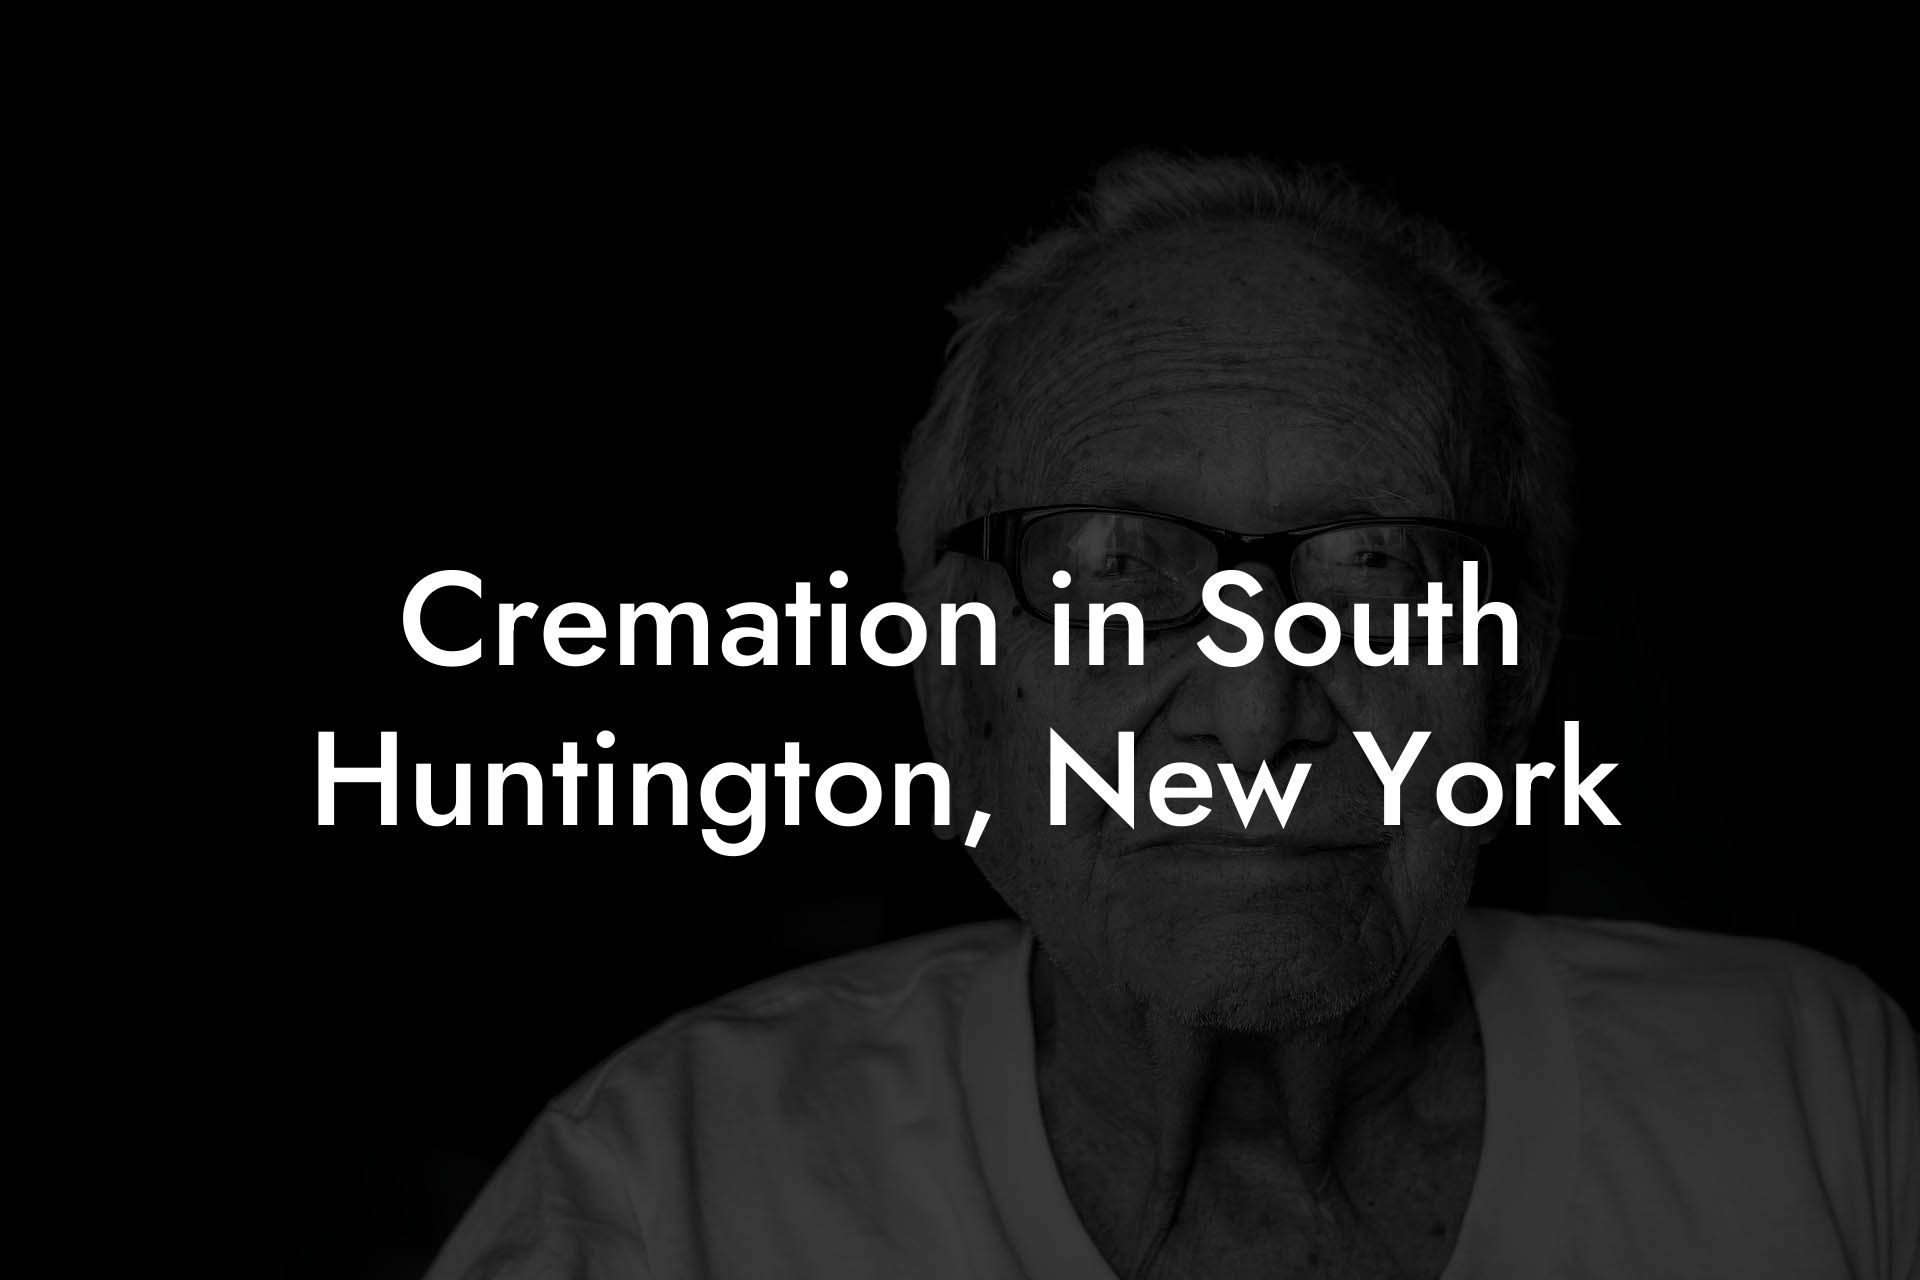 Cremation in South Huntington, New York